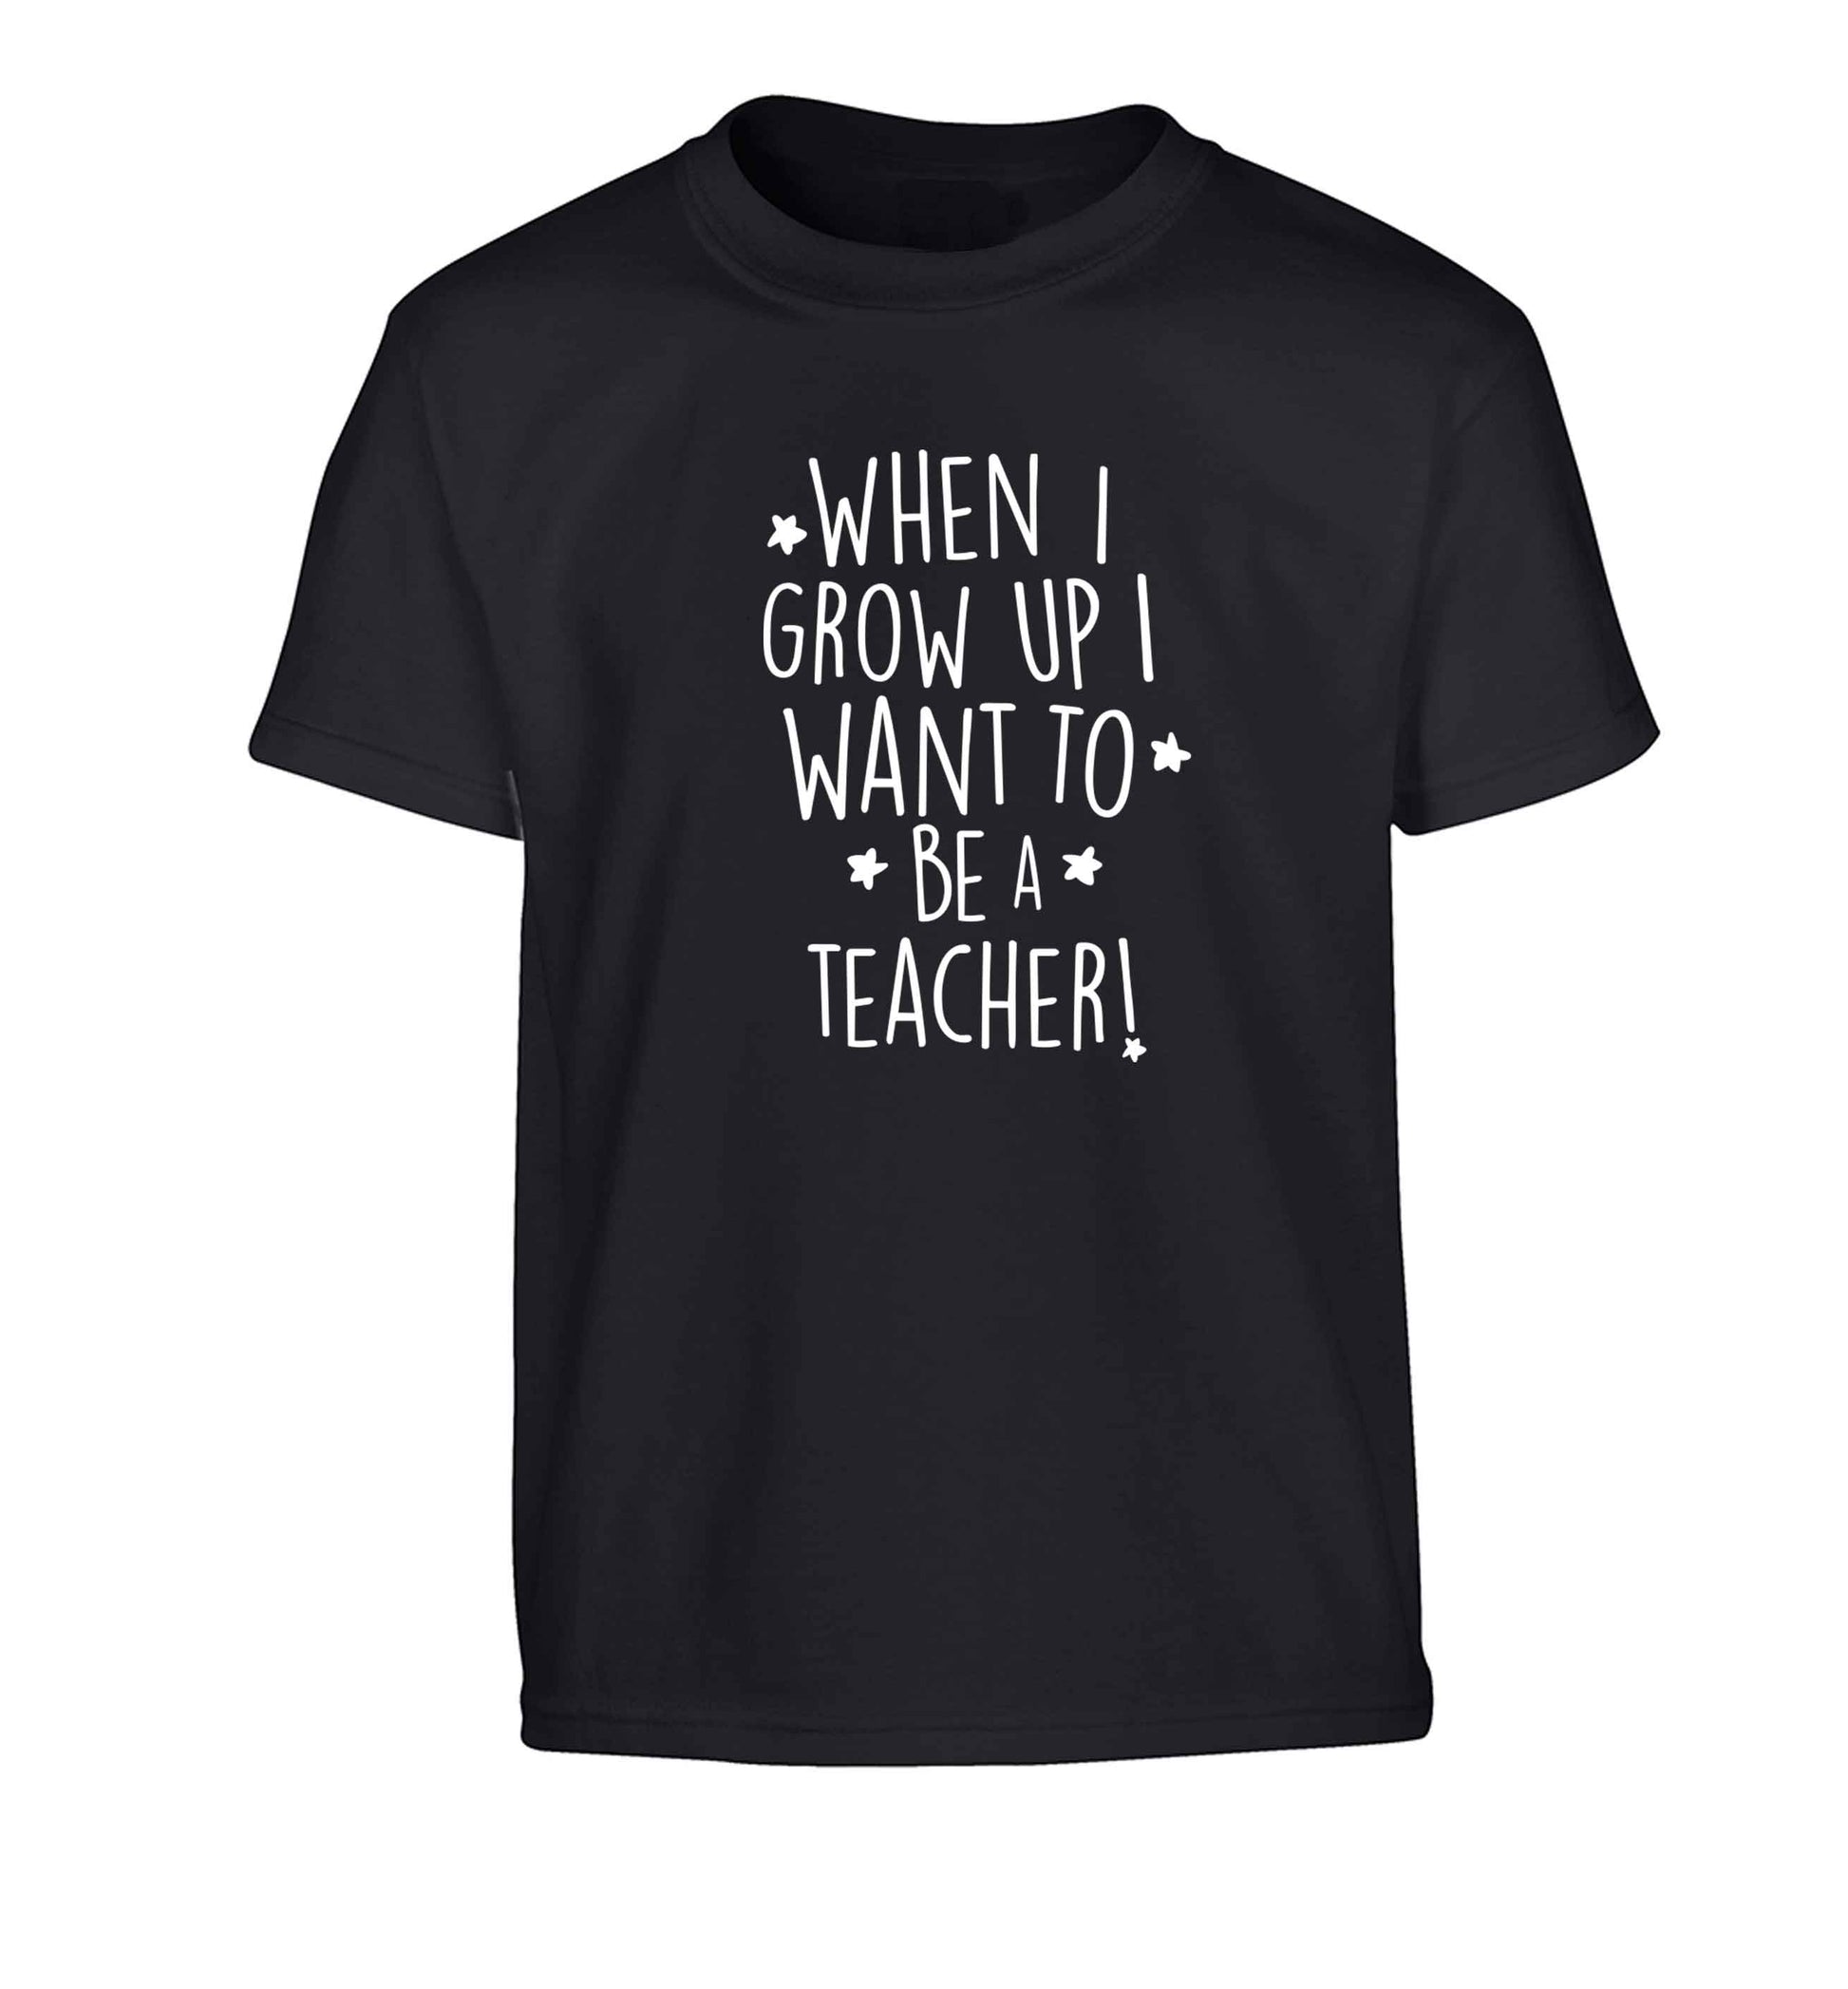 When I grow up I want to be a teacher Children's black Tshirt 12-13 Years